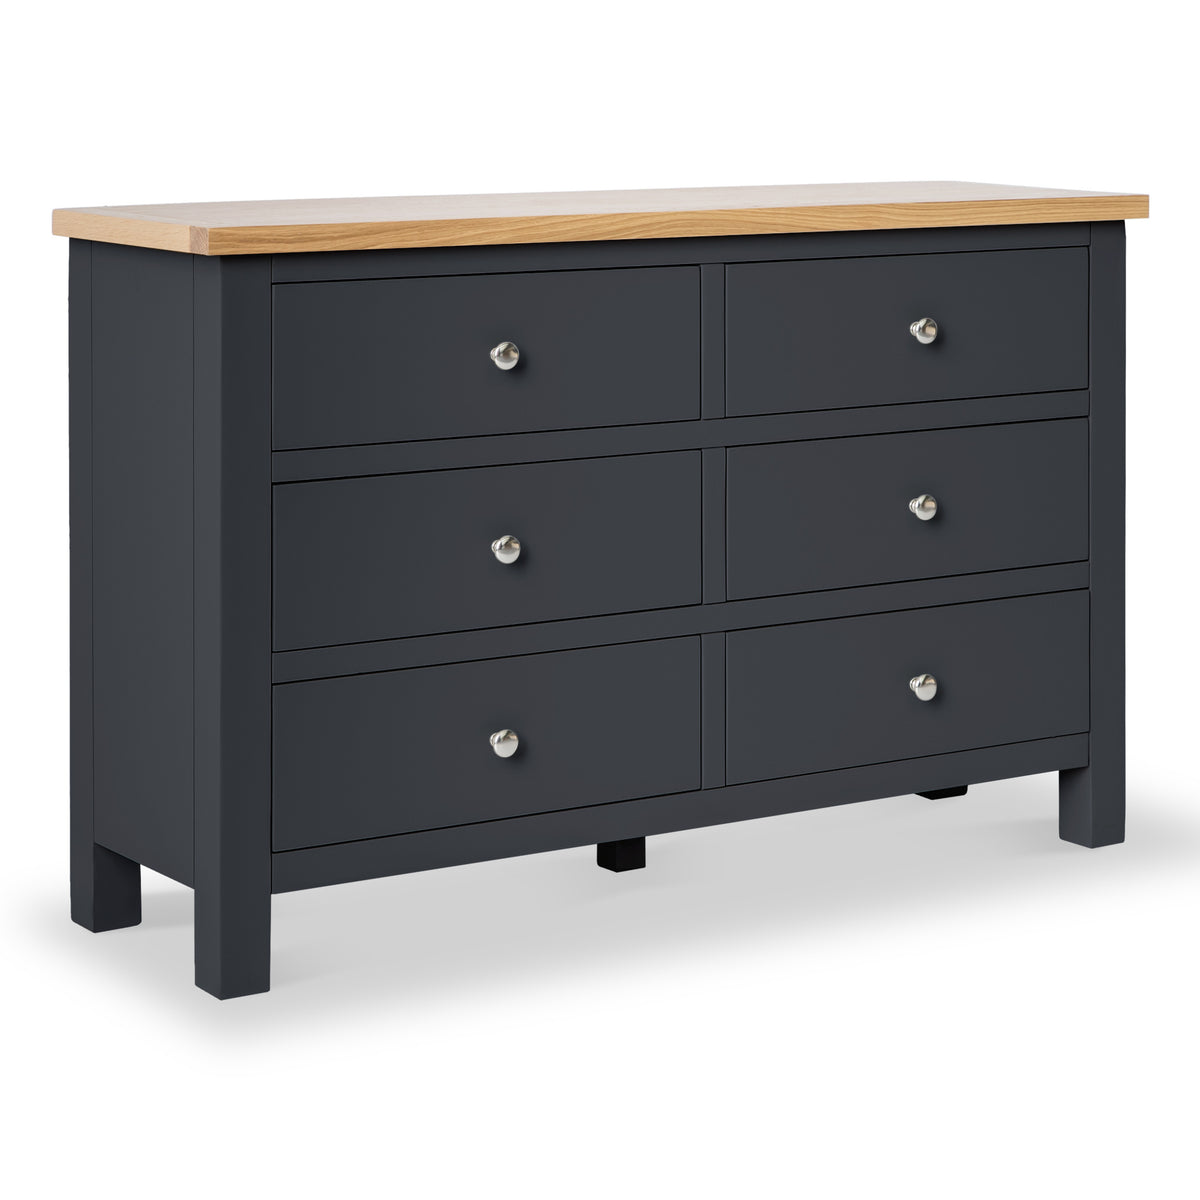 Farrow Charcoal 6 Drawer Bedroom Chest from Roseland Furniture